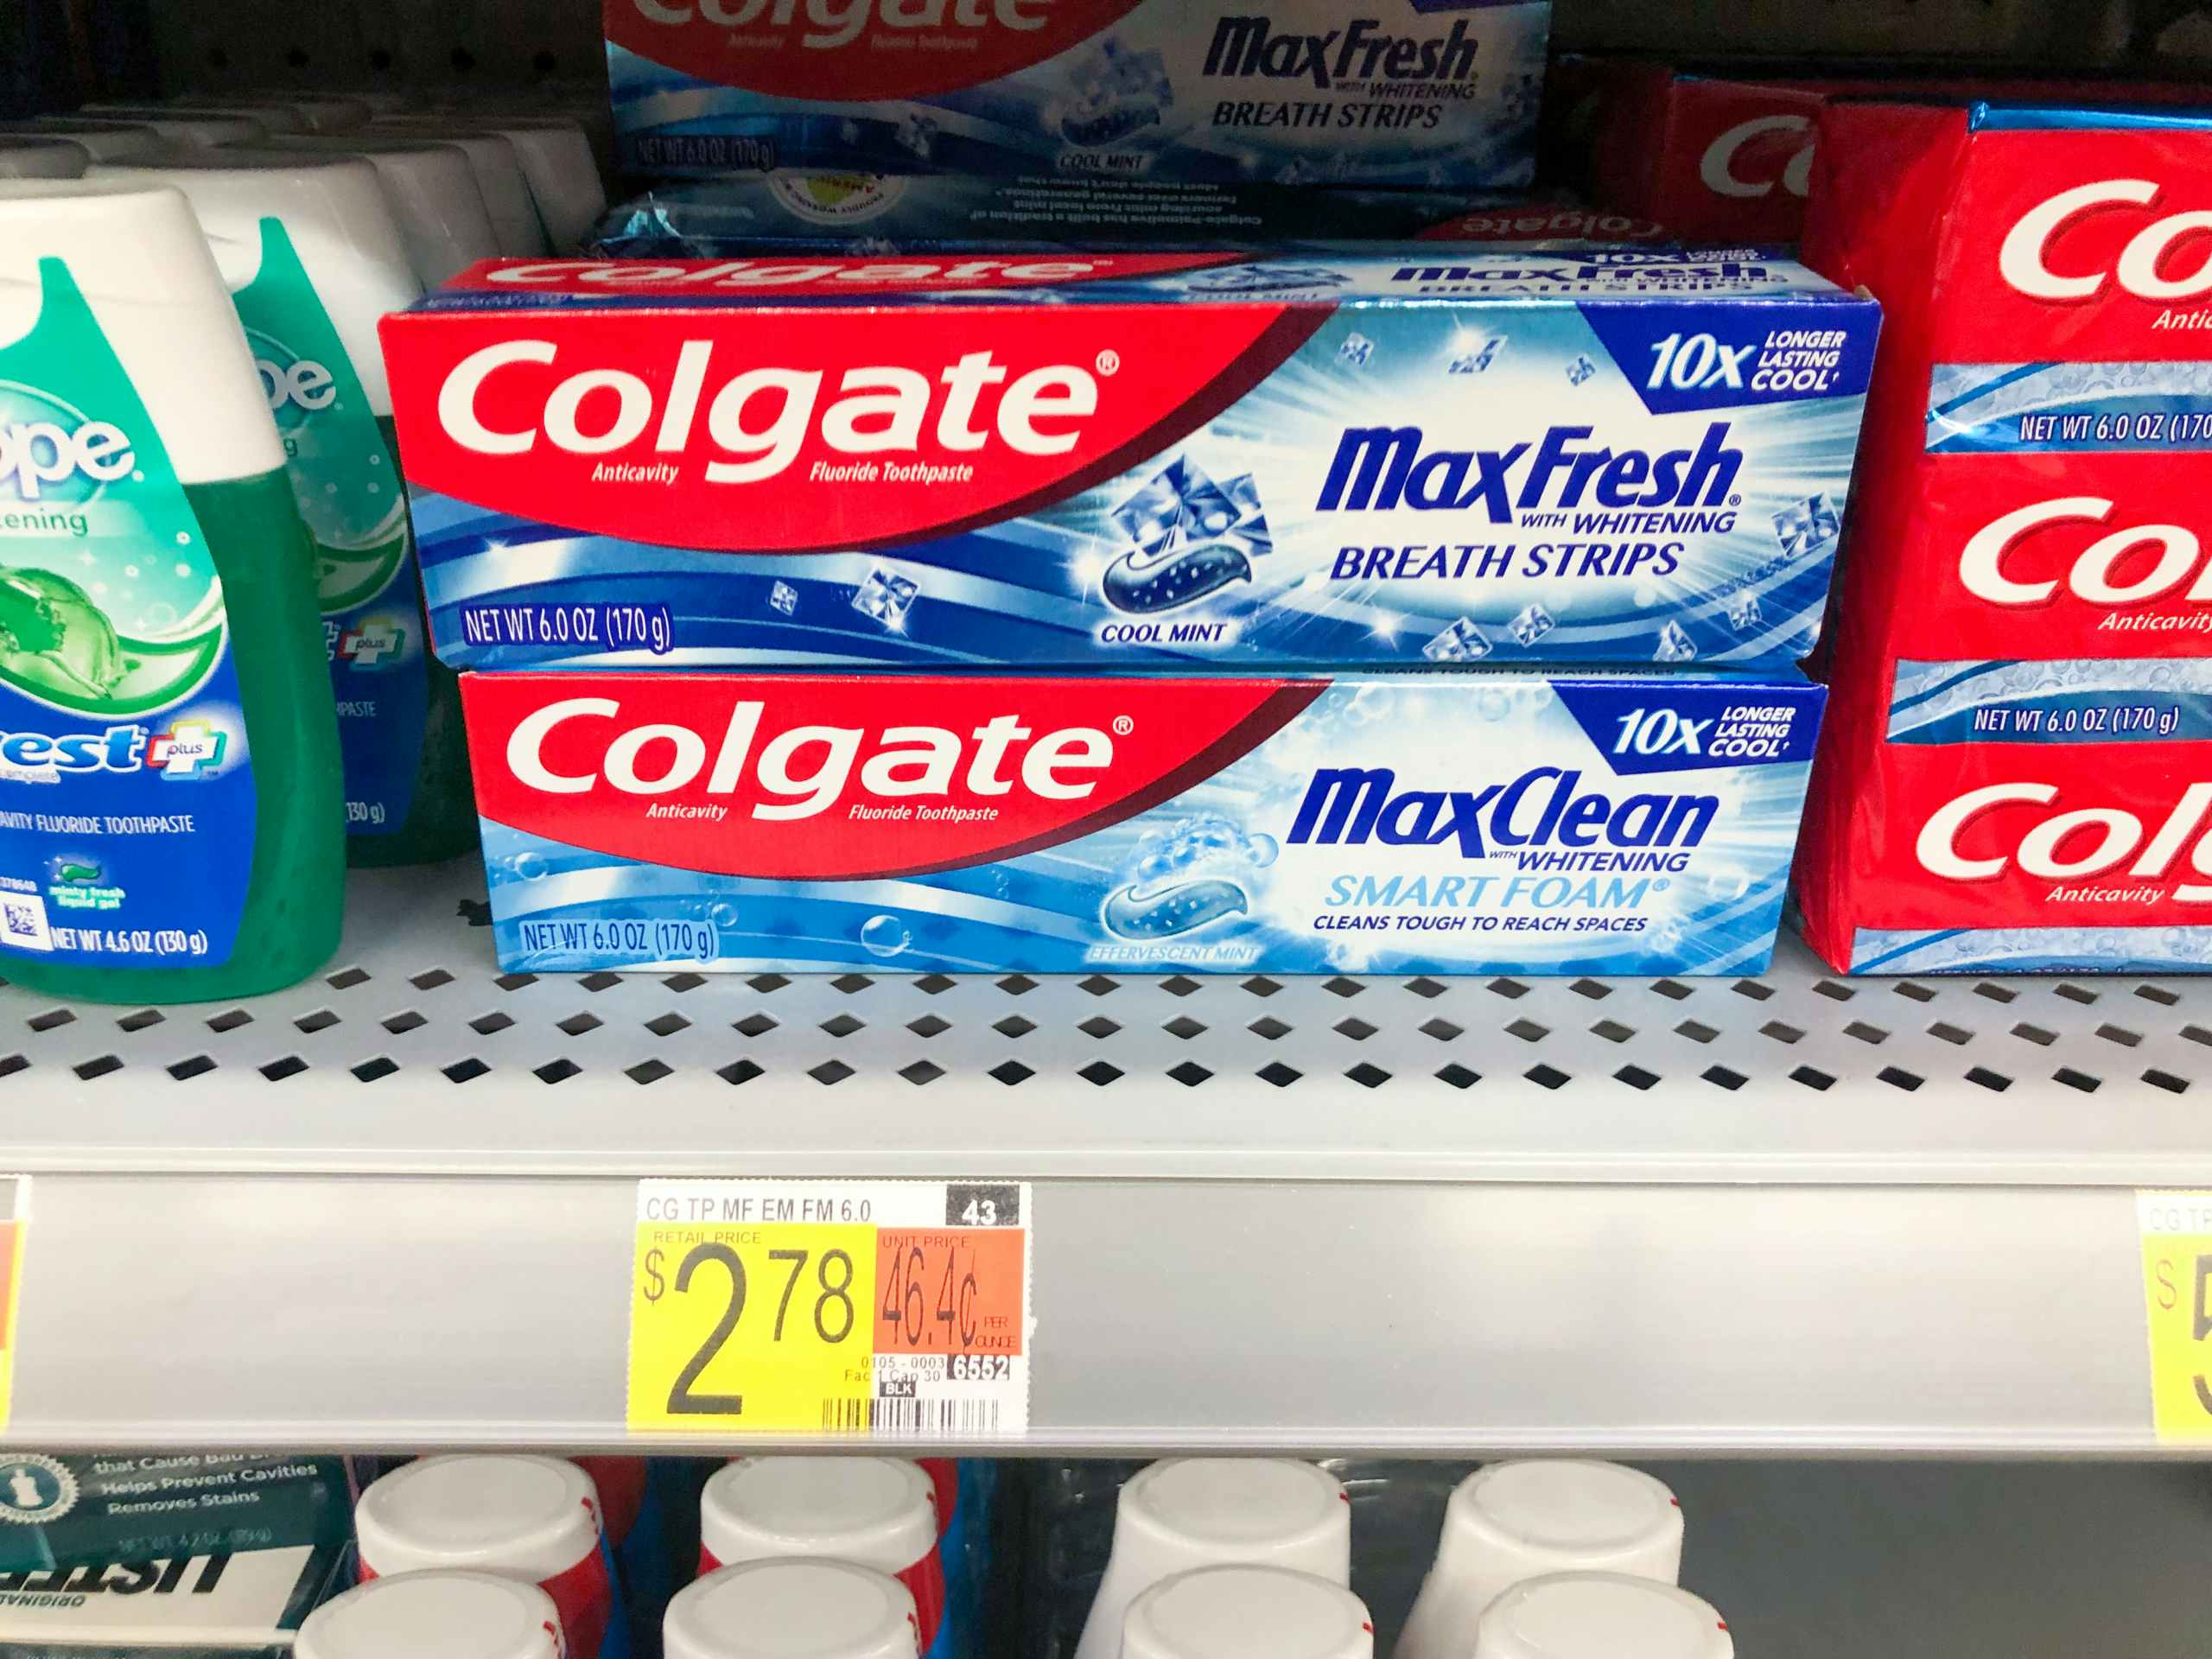 boxes of Colgate toothpaste on Walmart store shelf